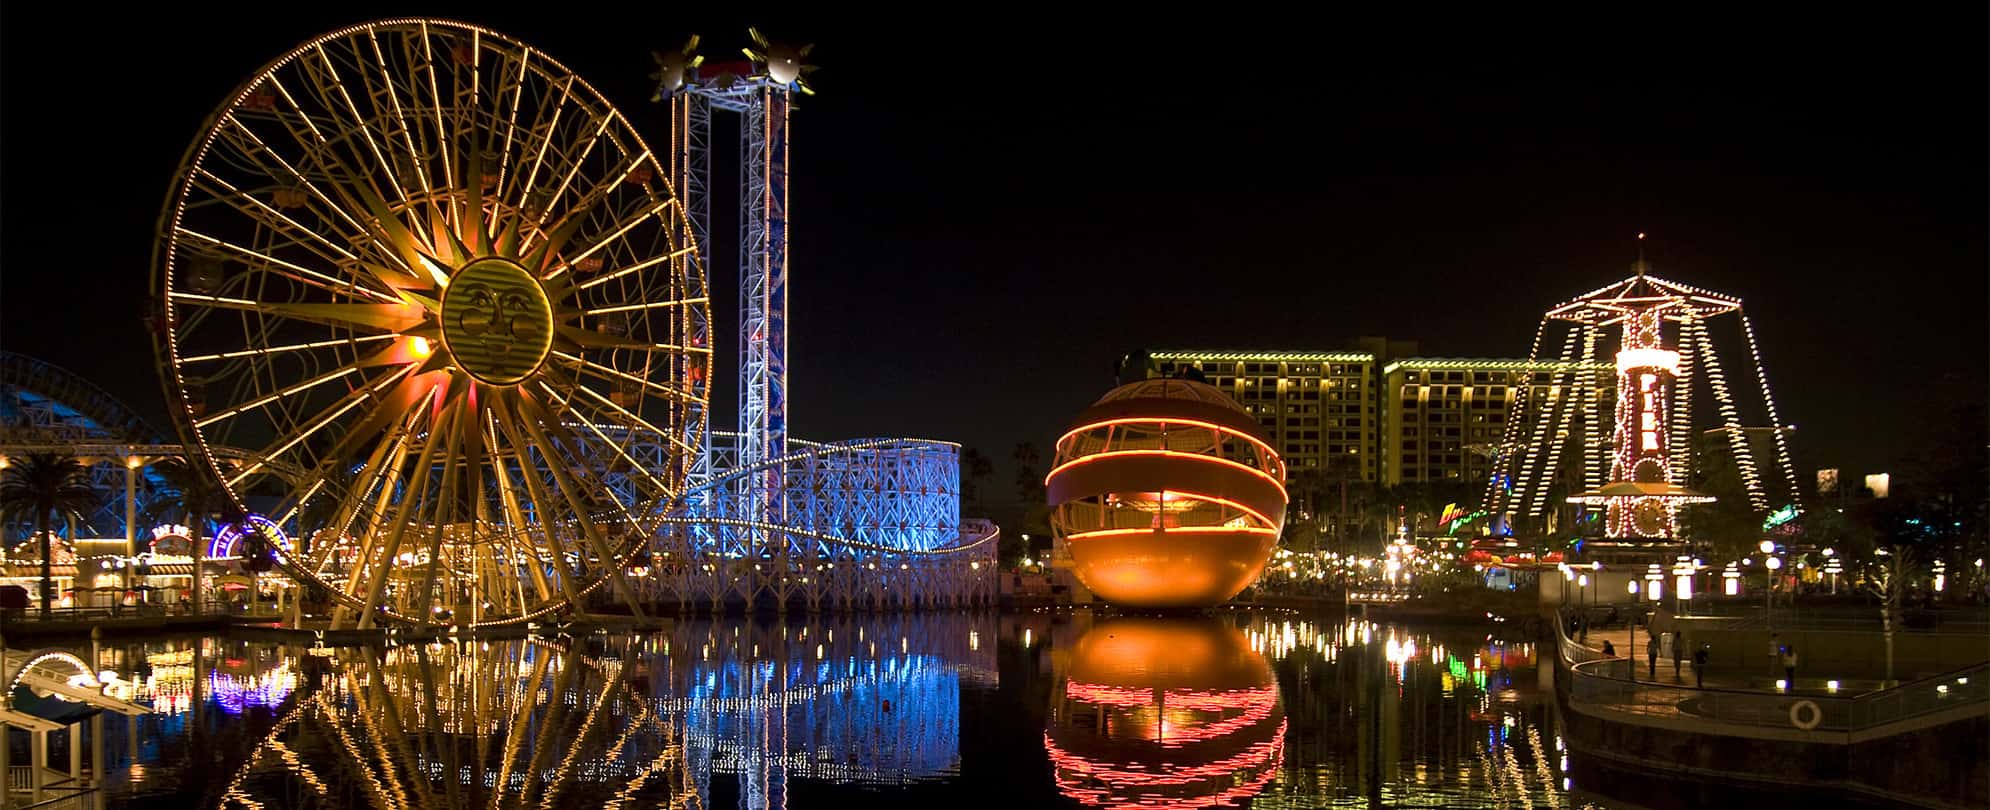 Disney's California Adventure theme park with a Ferris wheel and rides lit up at night and reflecting on the water.